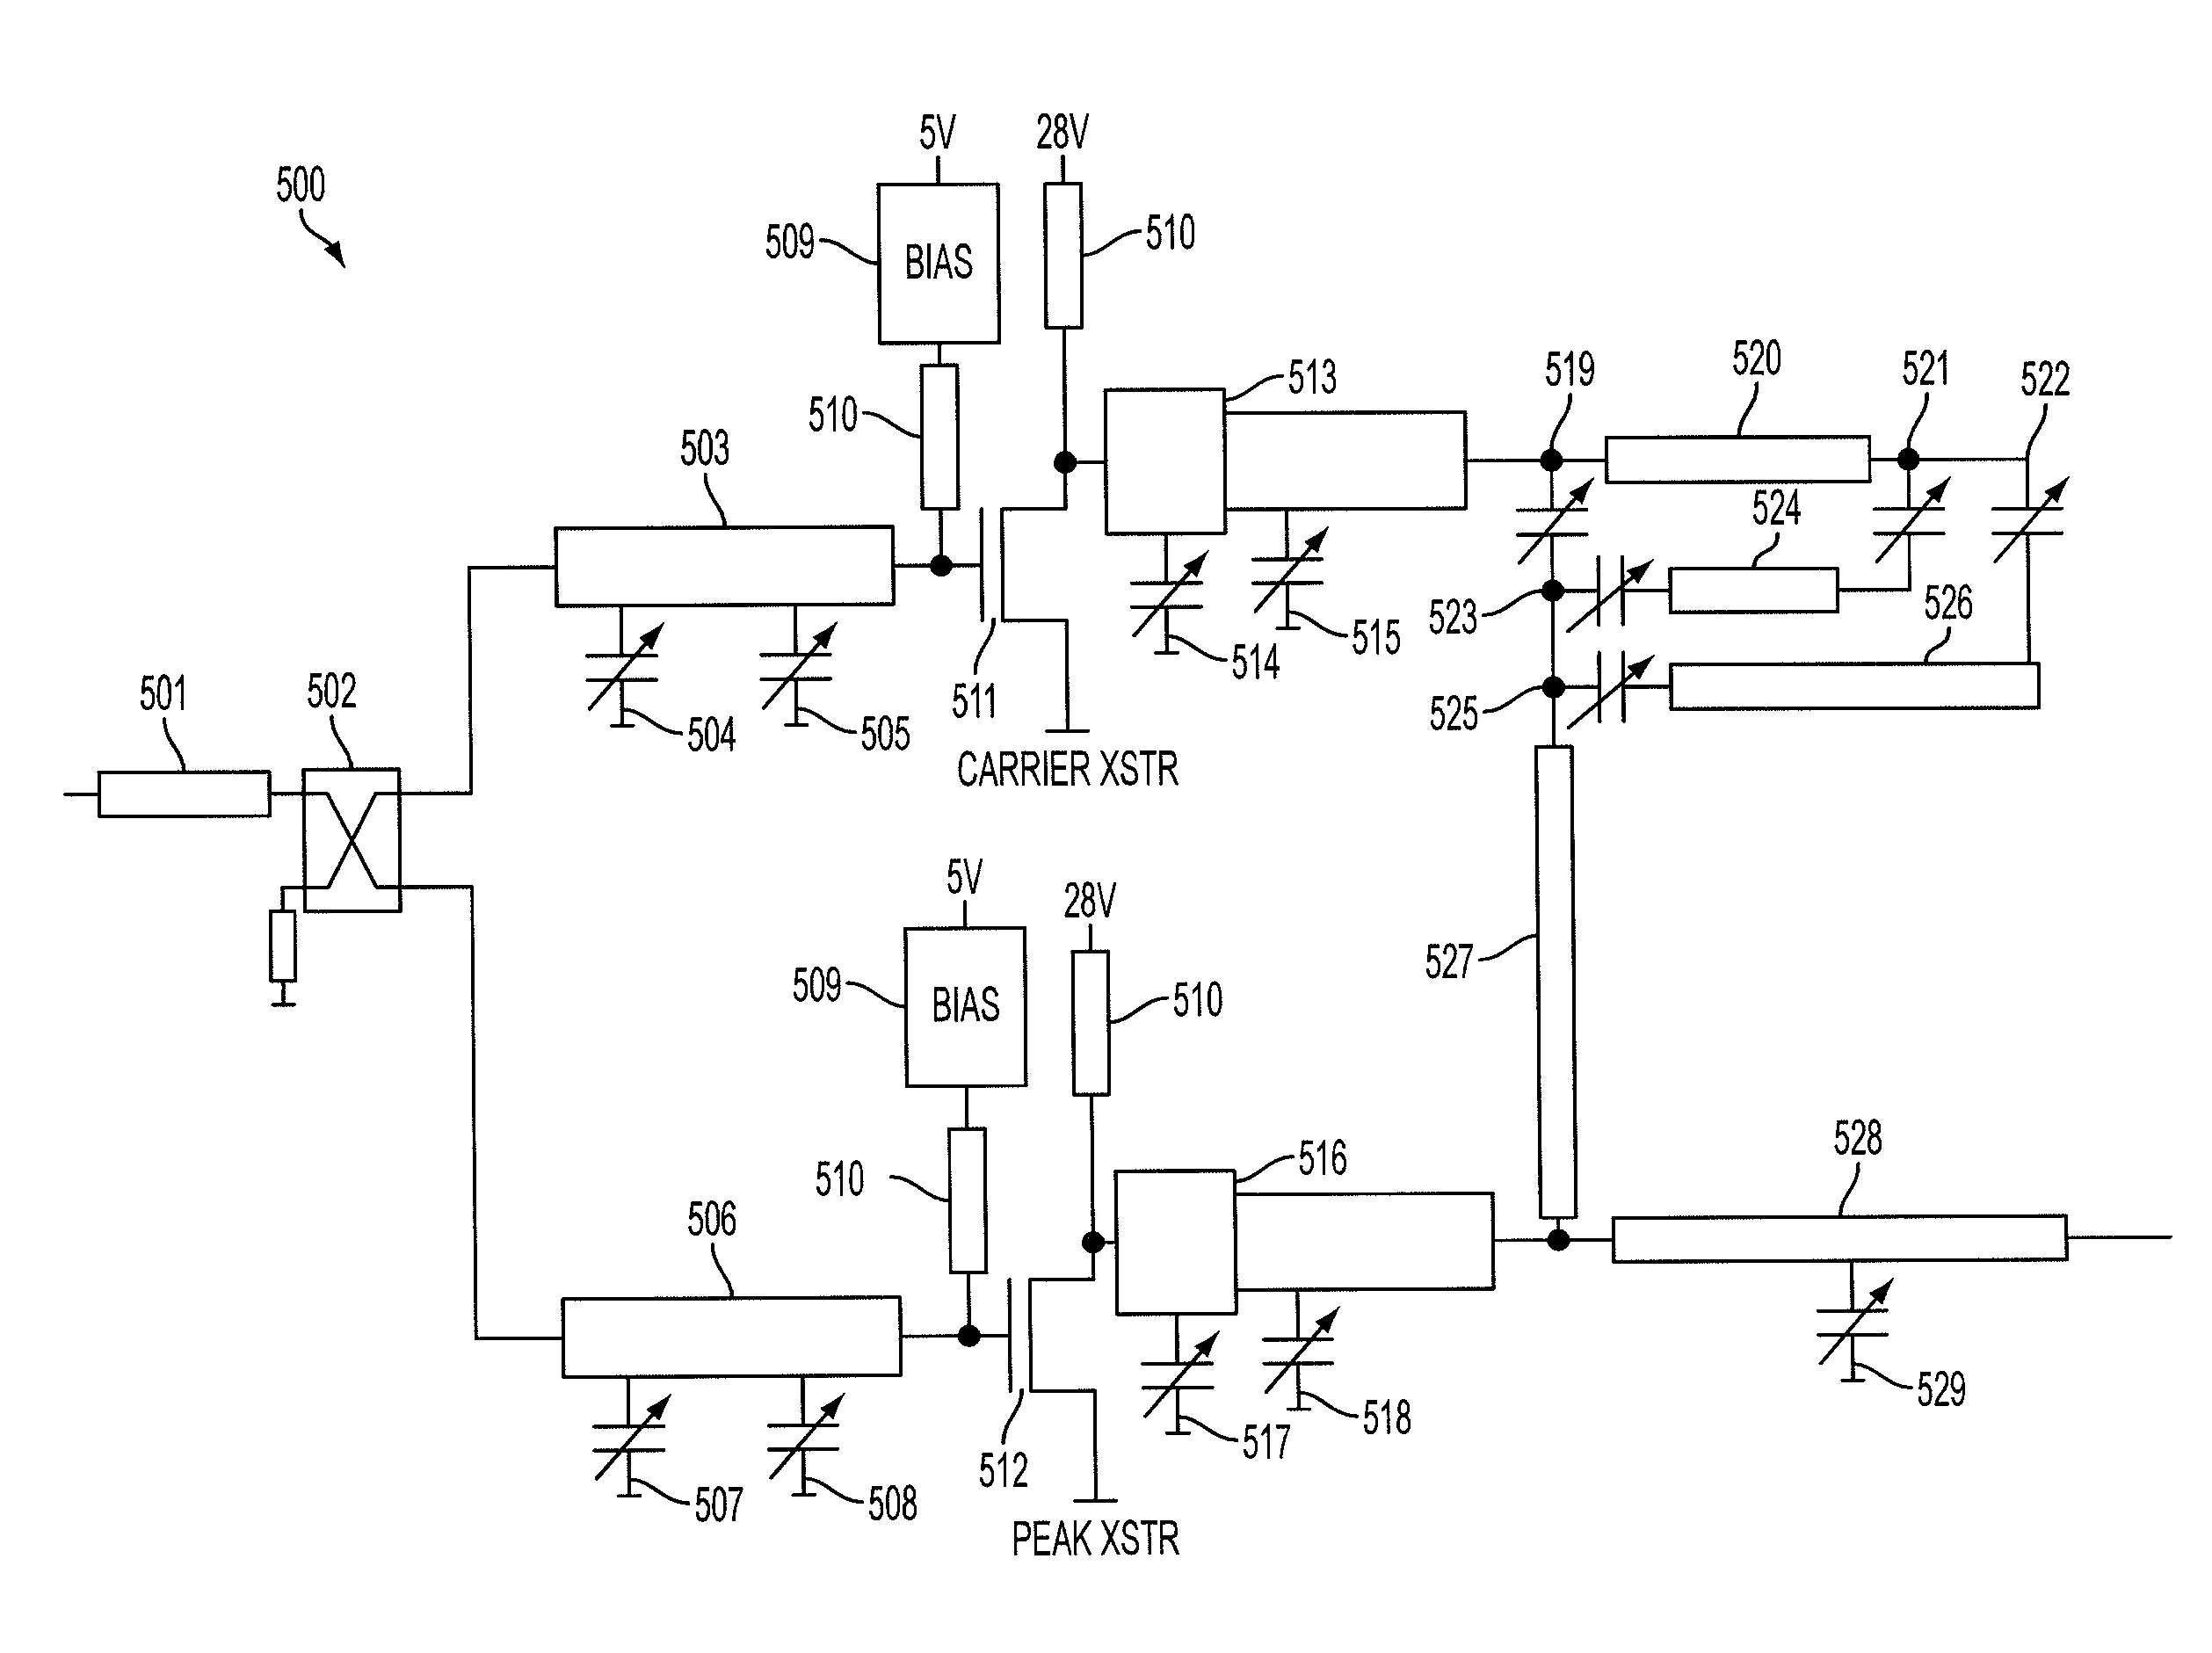 Apparatus and method for a switched capacitor architecture for multi-band doherty power amplifiers